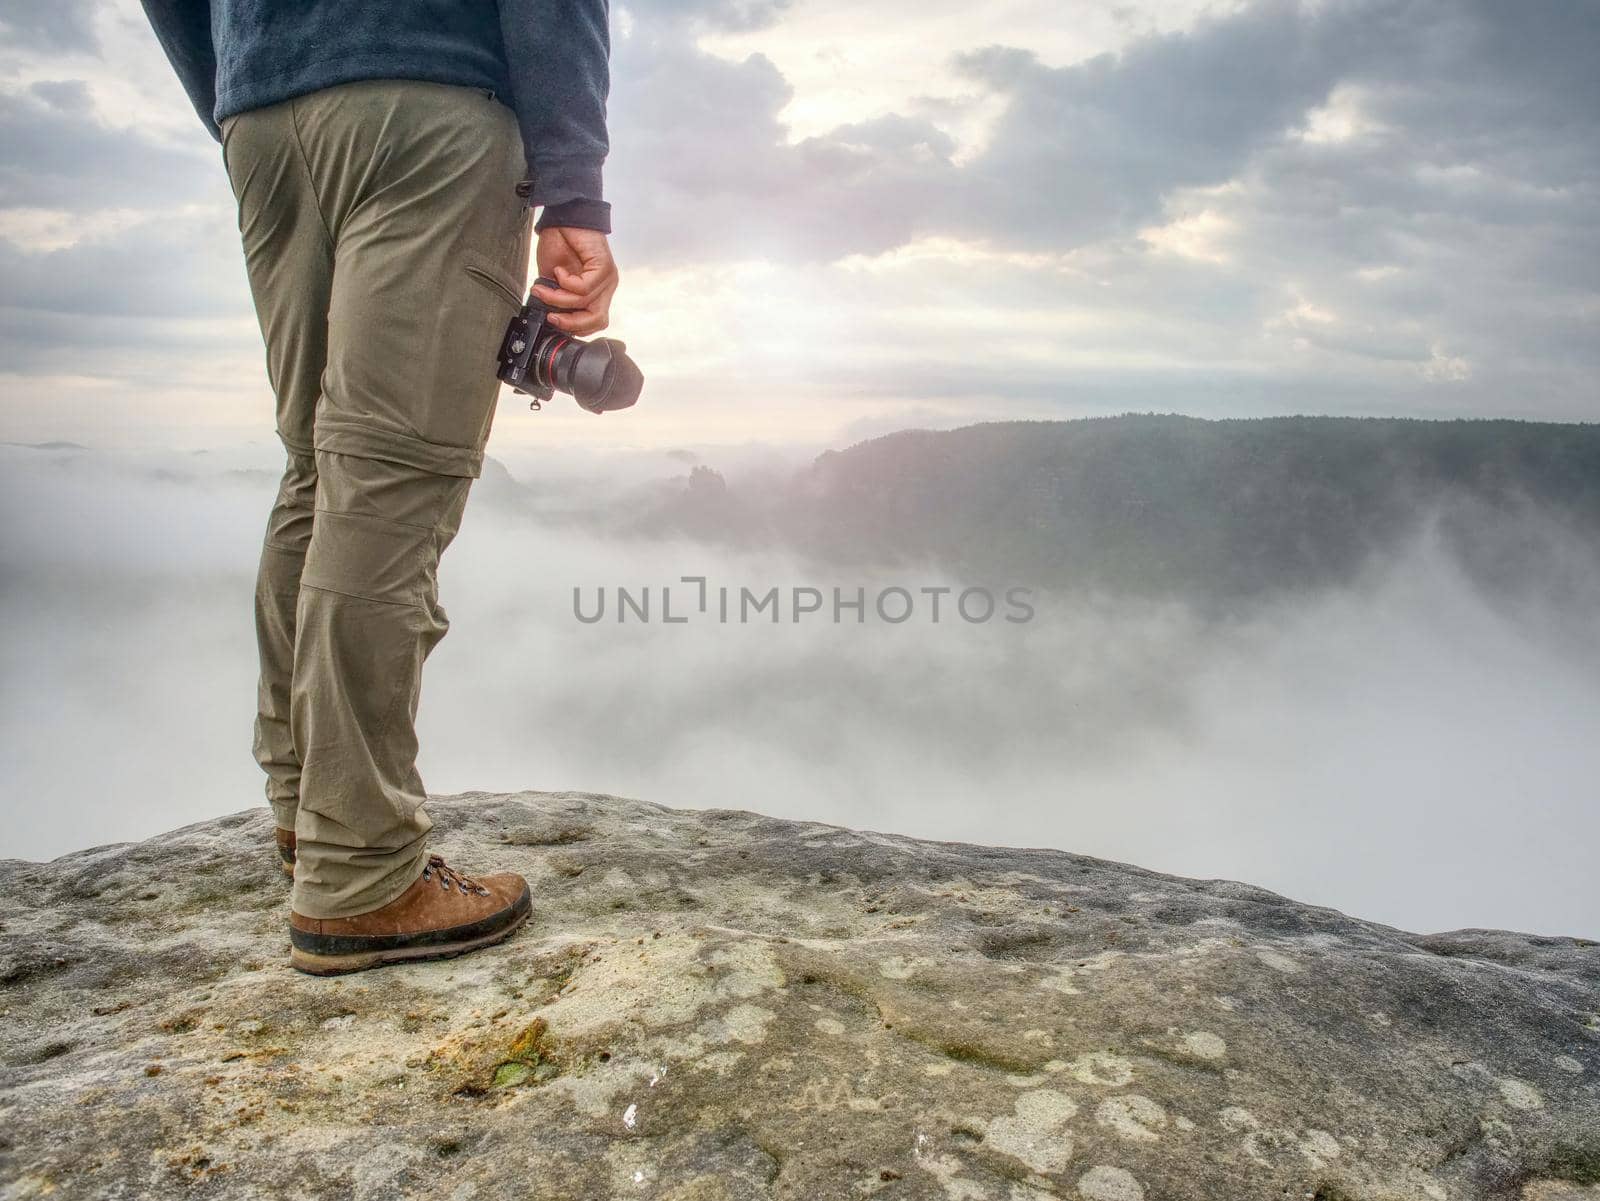 Landscape photograper with camera ready in hand. Man climbed up on exposed rock for fall photos with his digital camera. Cliff above misty autumn landscape.